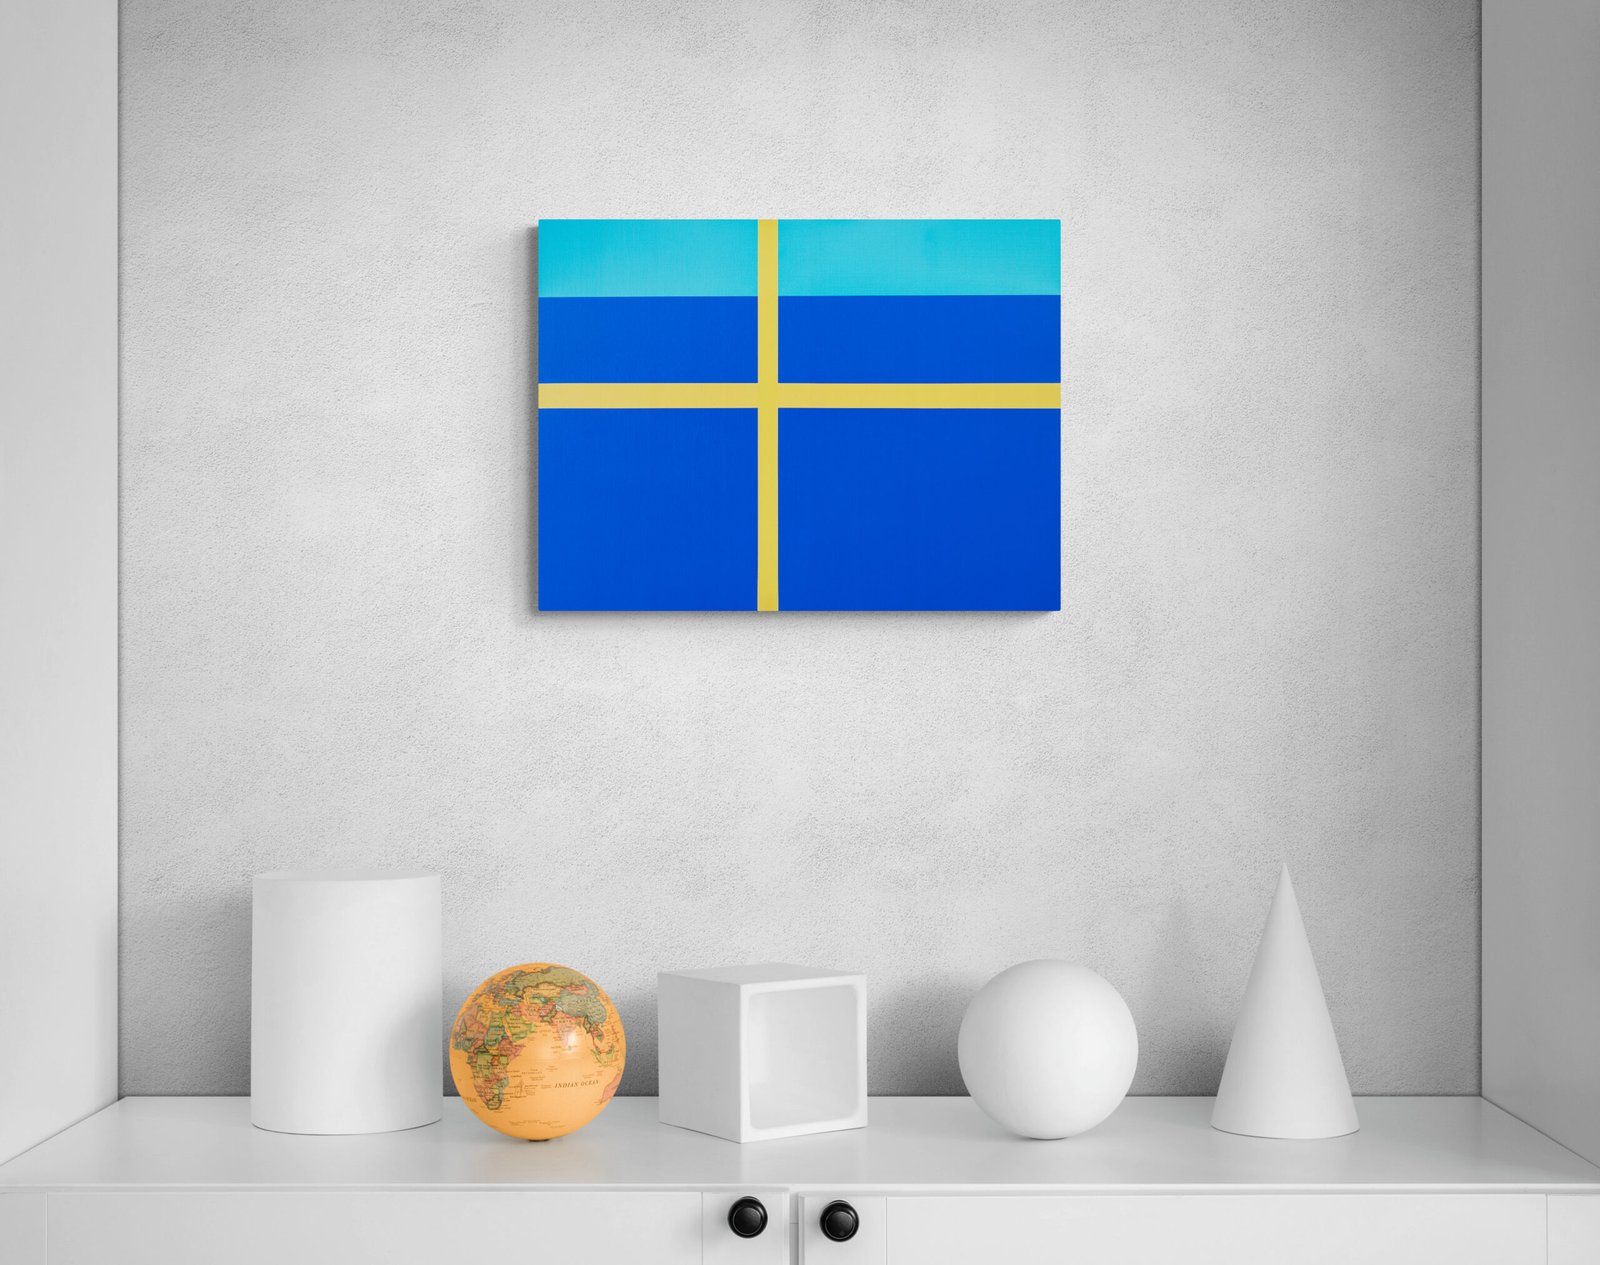 Small-scale abstract artwork of a window scene